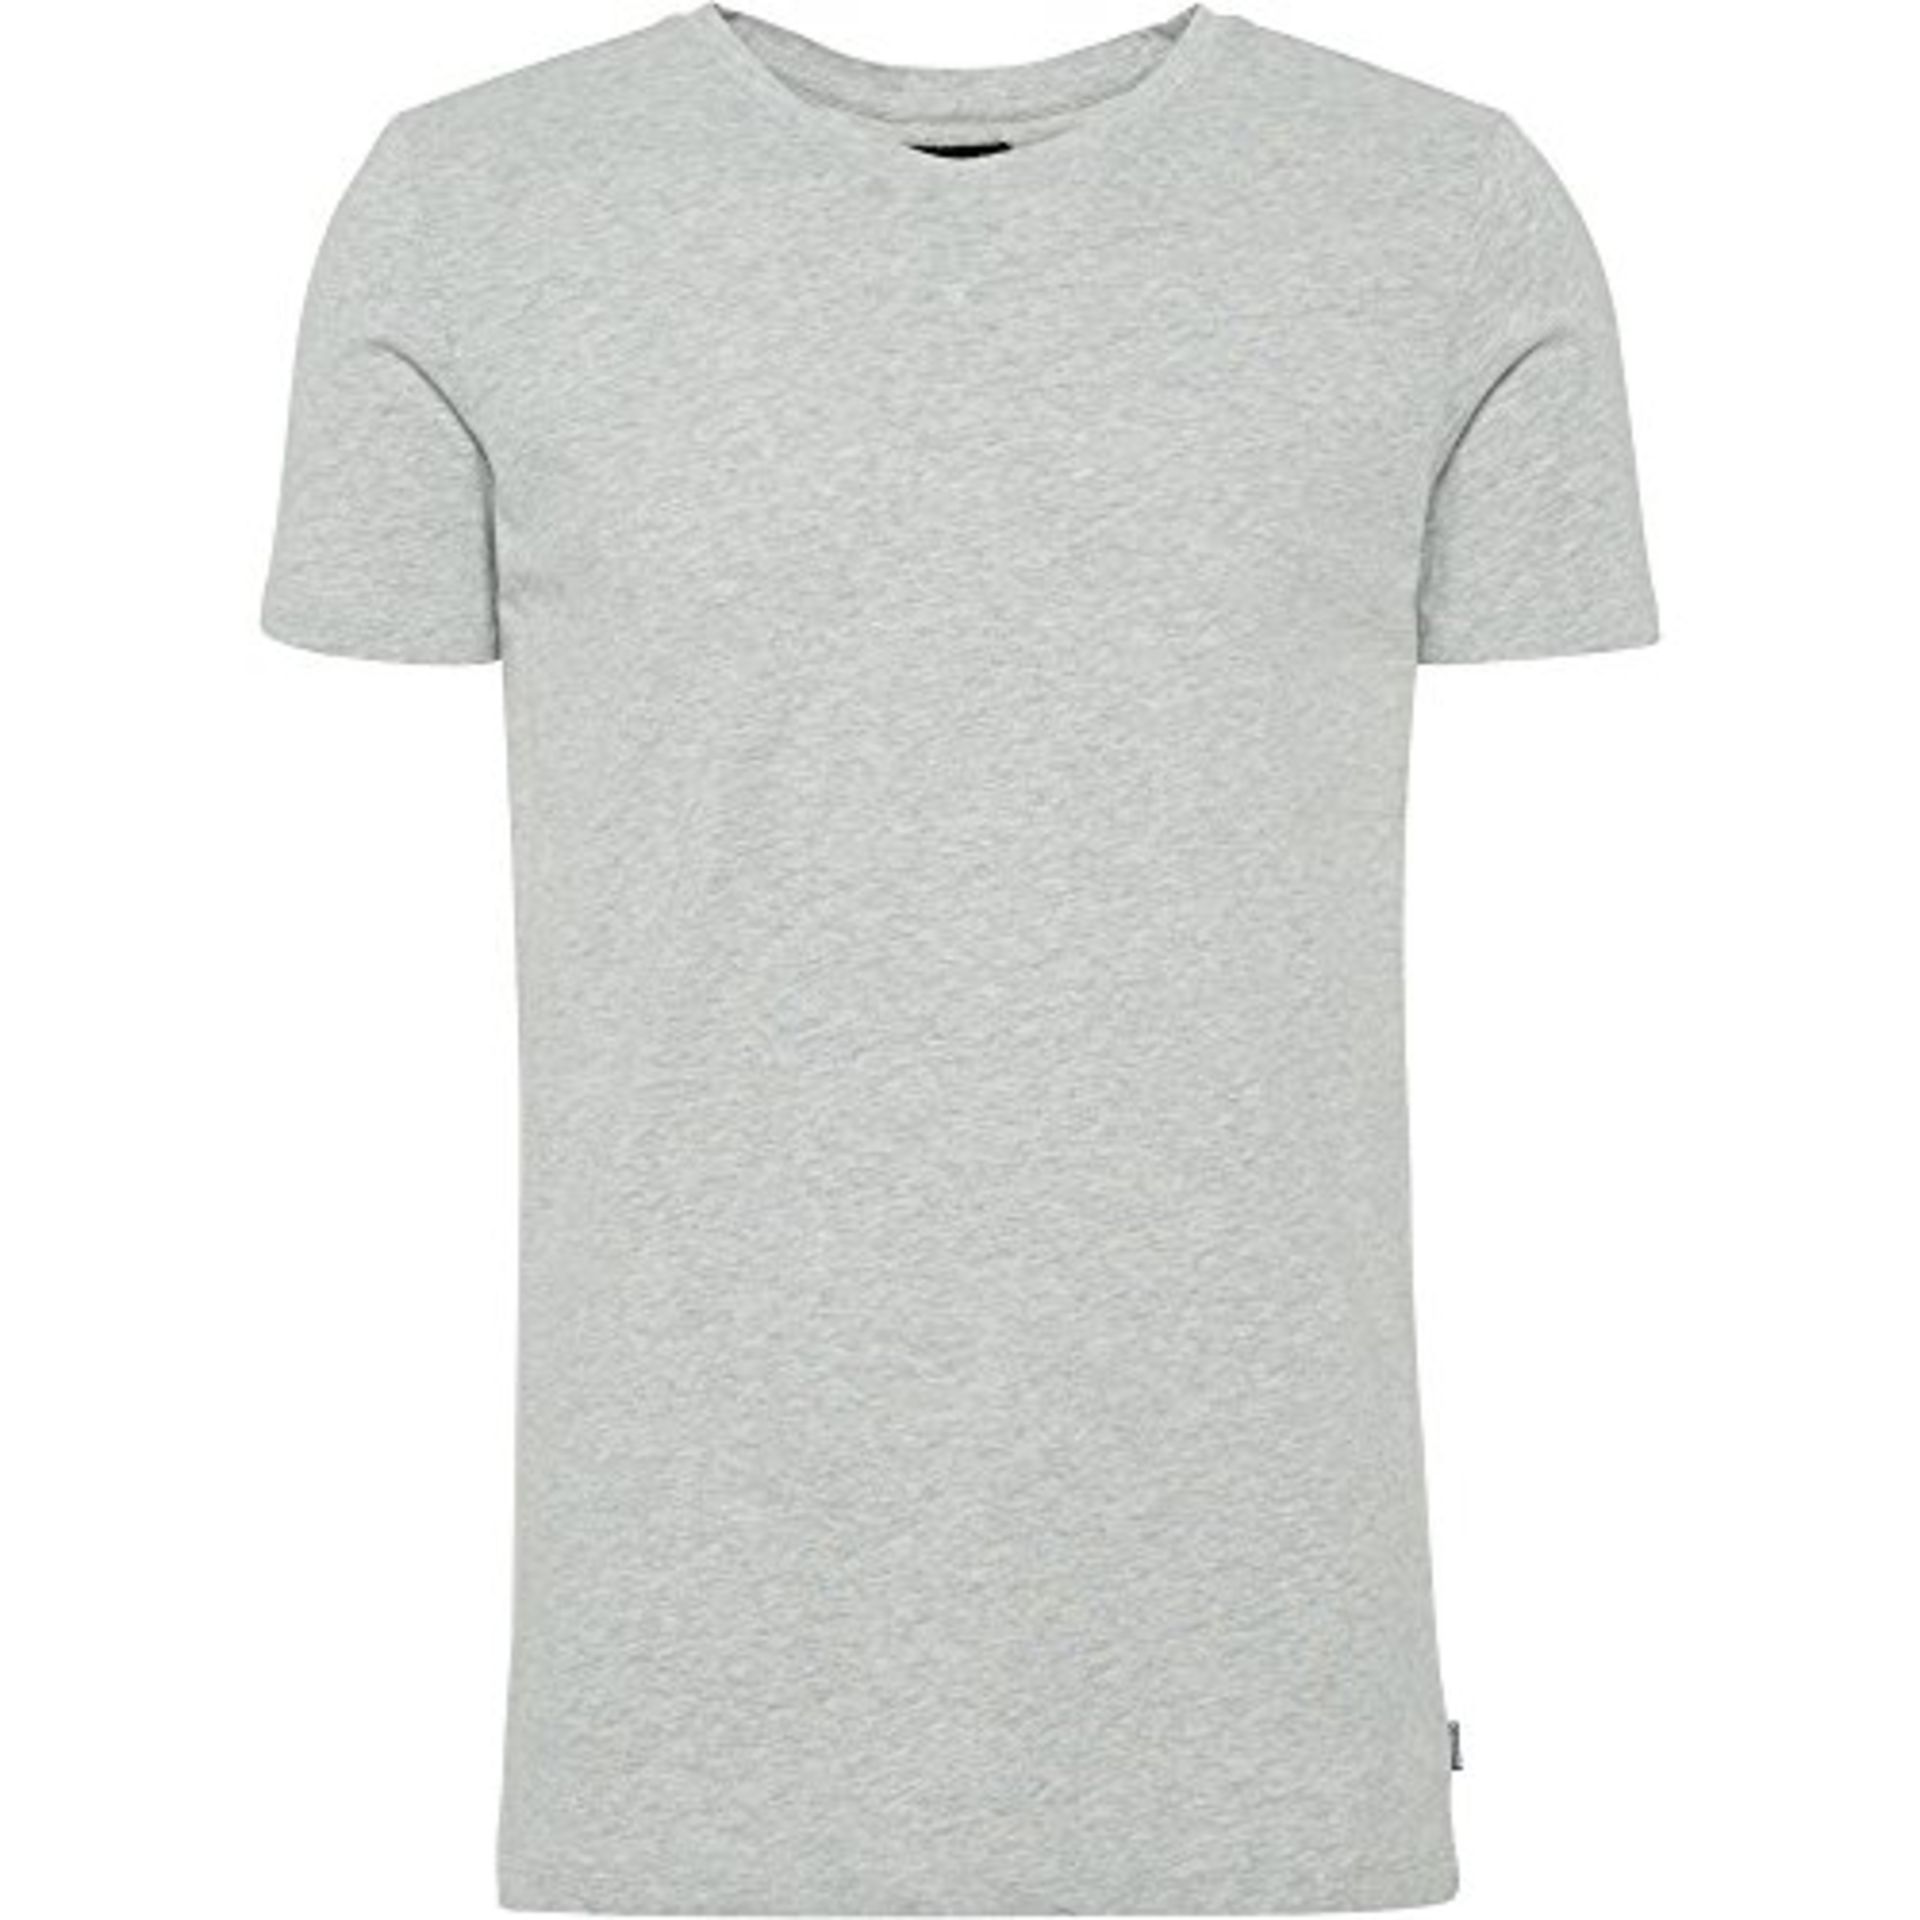 Brand new Chiemsee Men's T-Shirt Size XL RRP £25